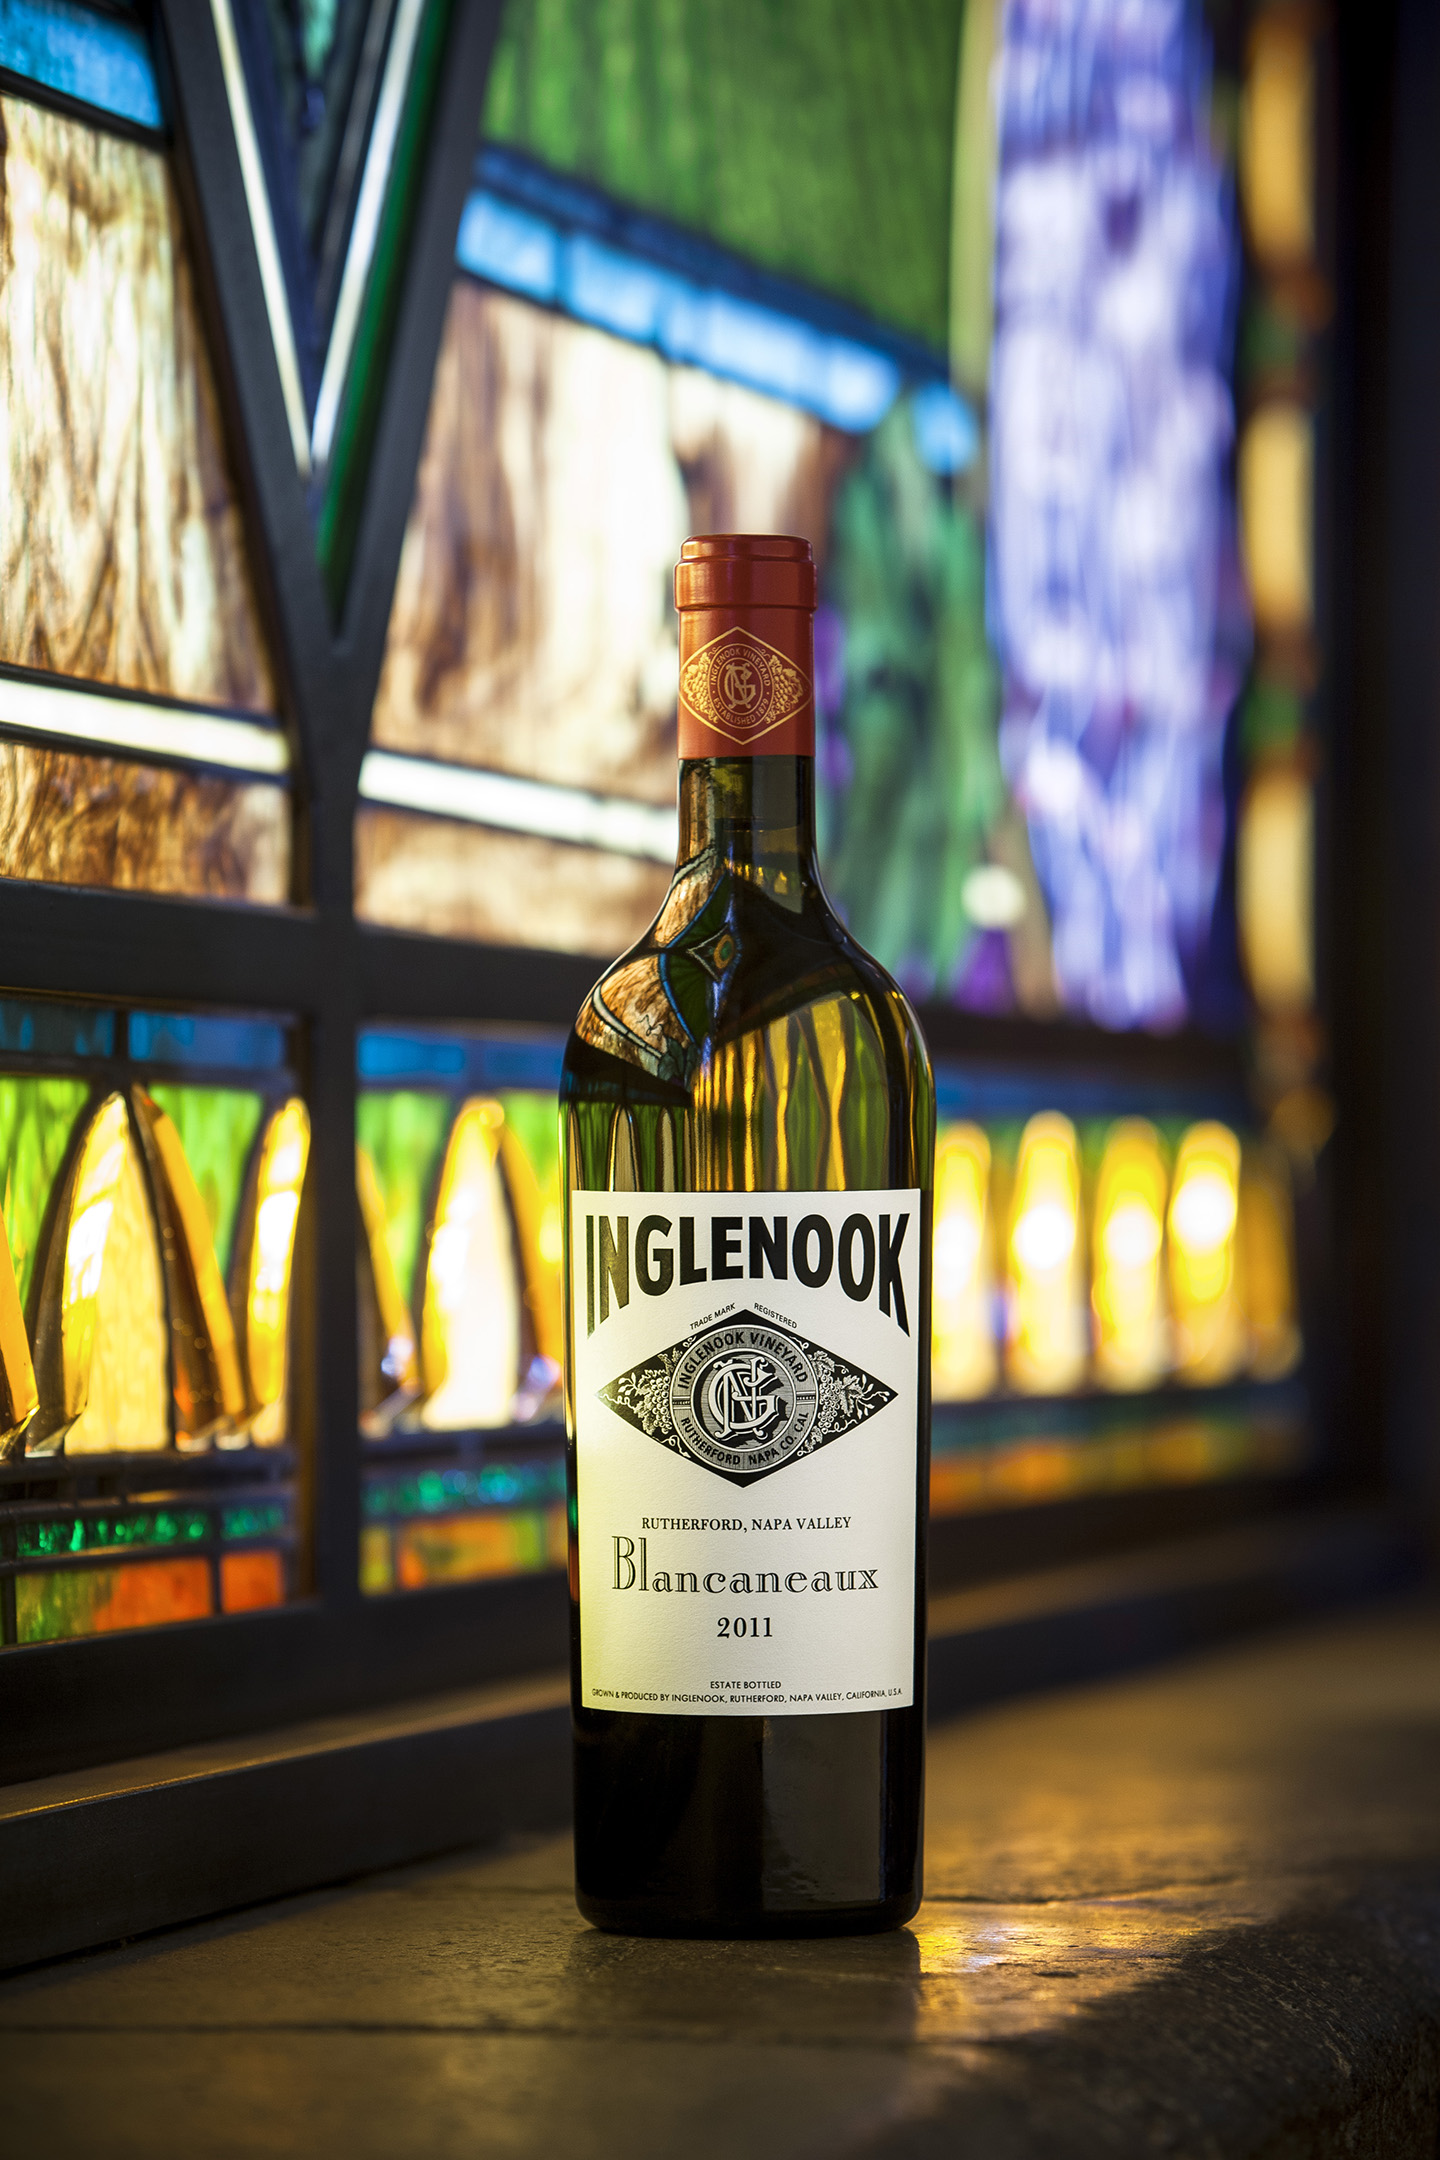 Bottle of Inglenook's Blancaneaux wine sitting on a cement ledge in front of a stained glass window